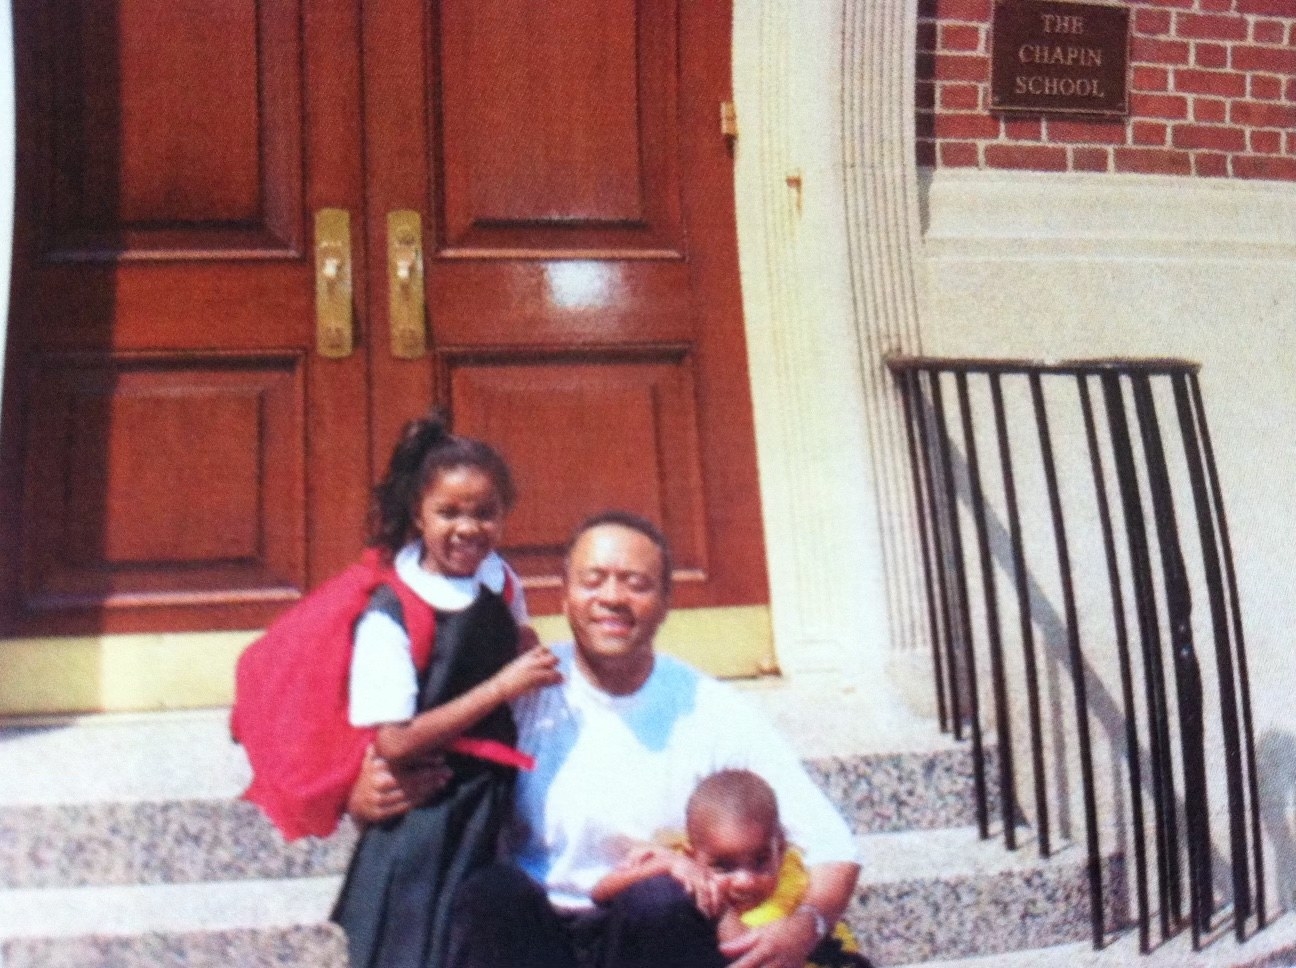 Gabrielle, young and in a school uniform with a big red backpack, in the arms of her uncle that sits on the sets of a school building. Her brother is under his other arm in a yellow shirt.